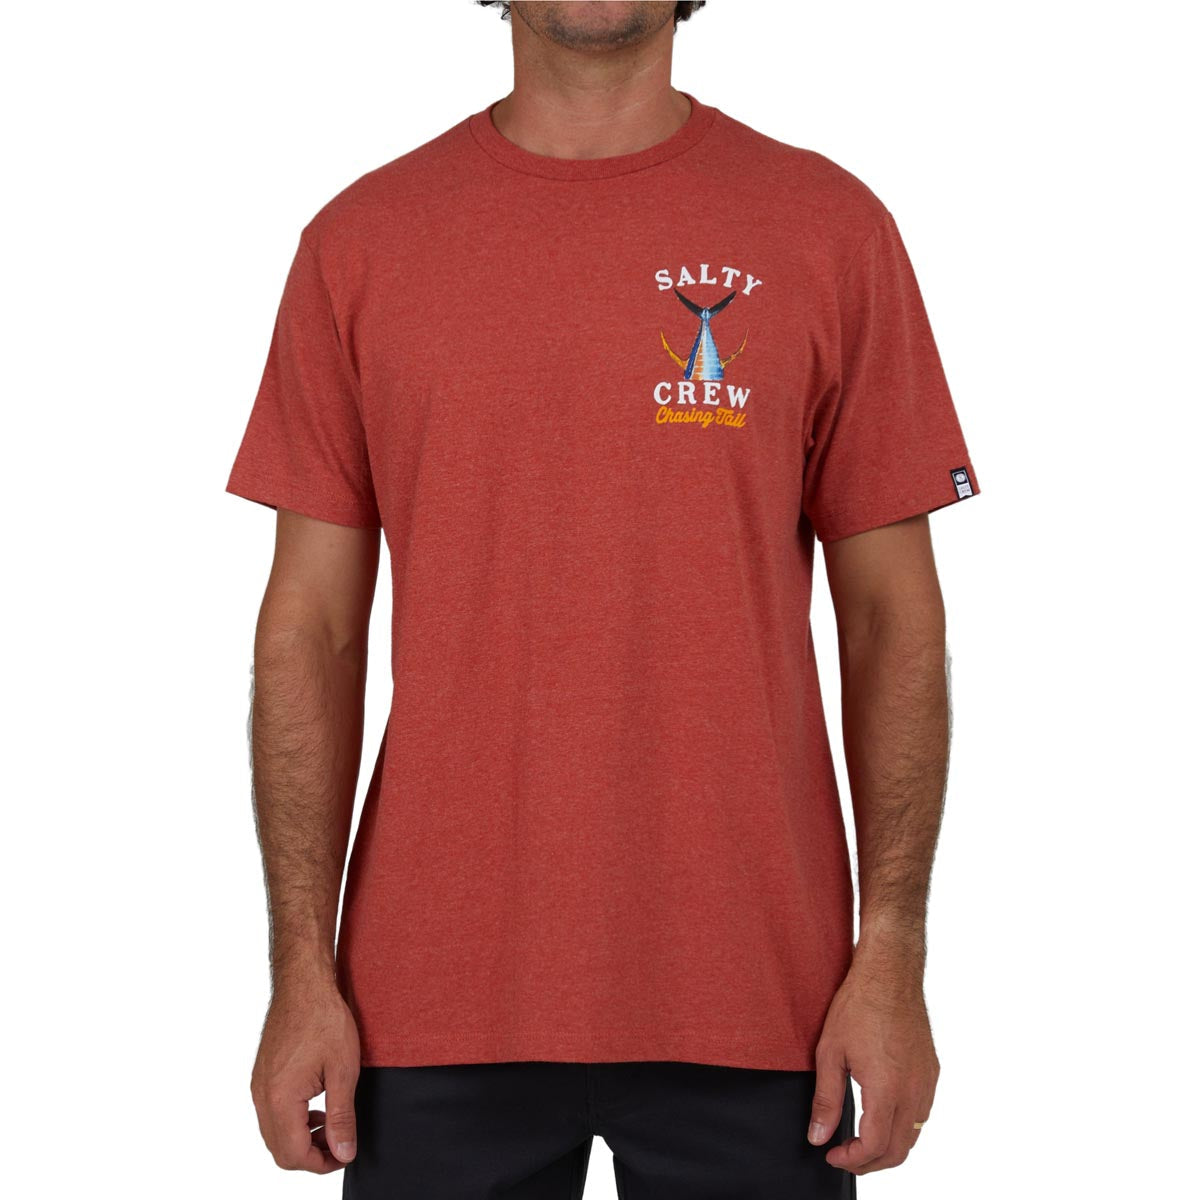 Salty Crew Tailed Classic T-Shirt - Salmon Heather image 3